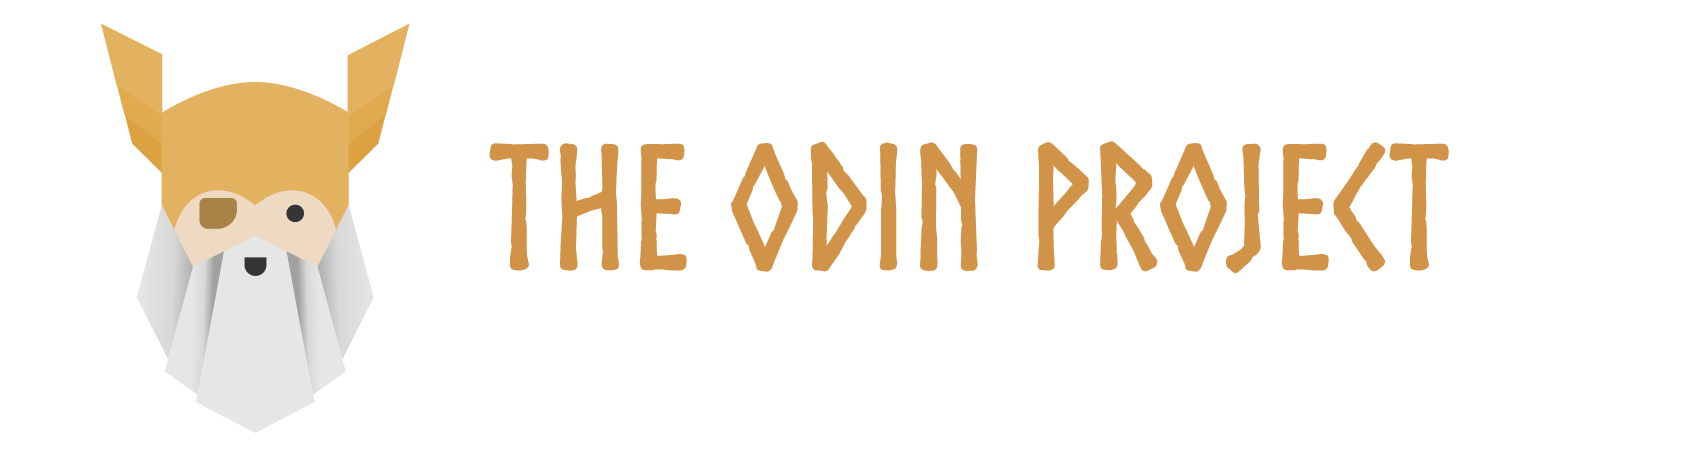 odin mascot head with text